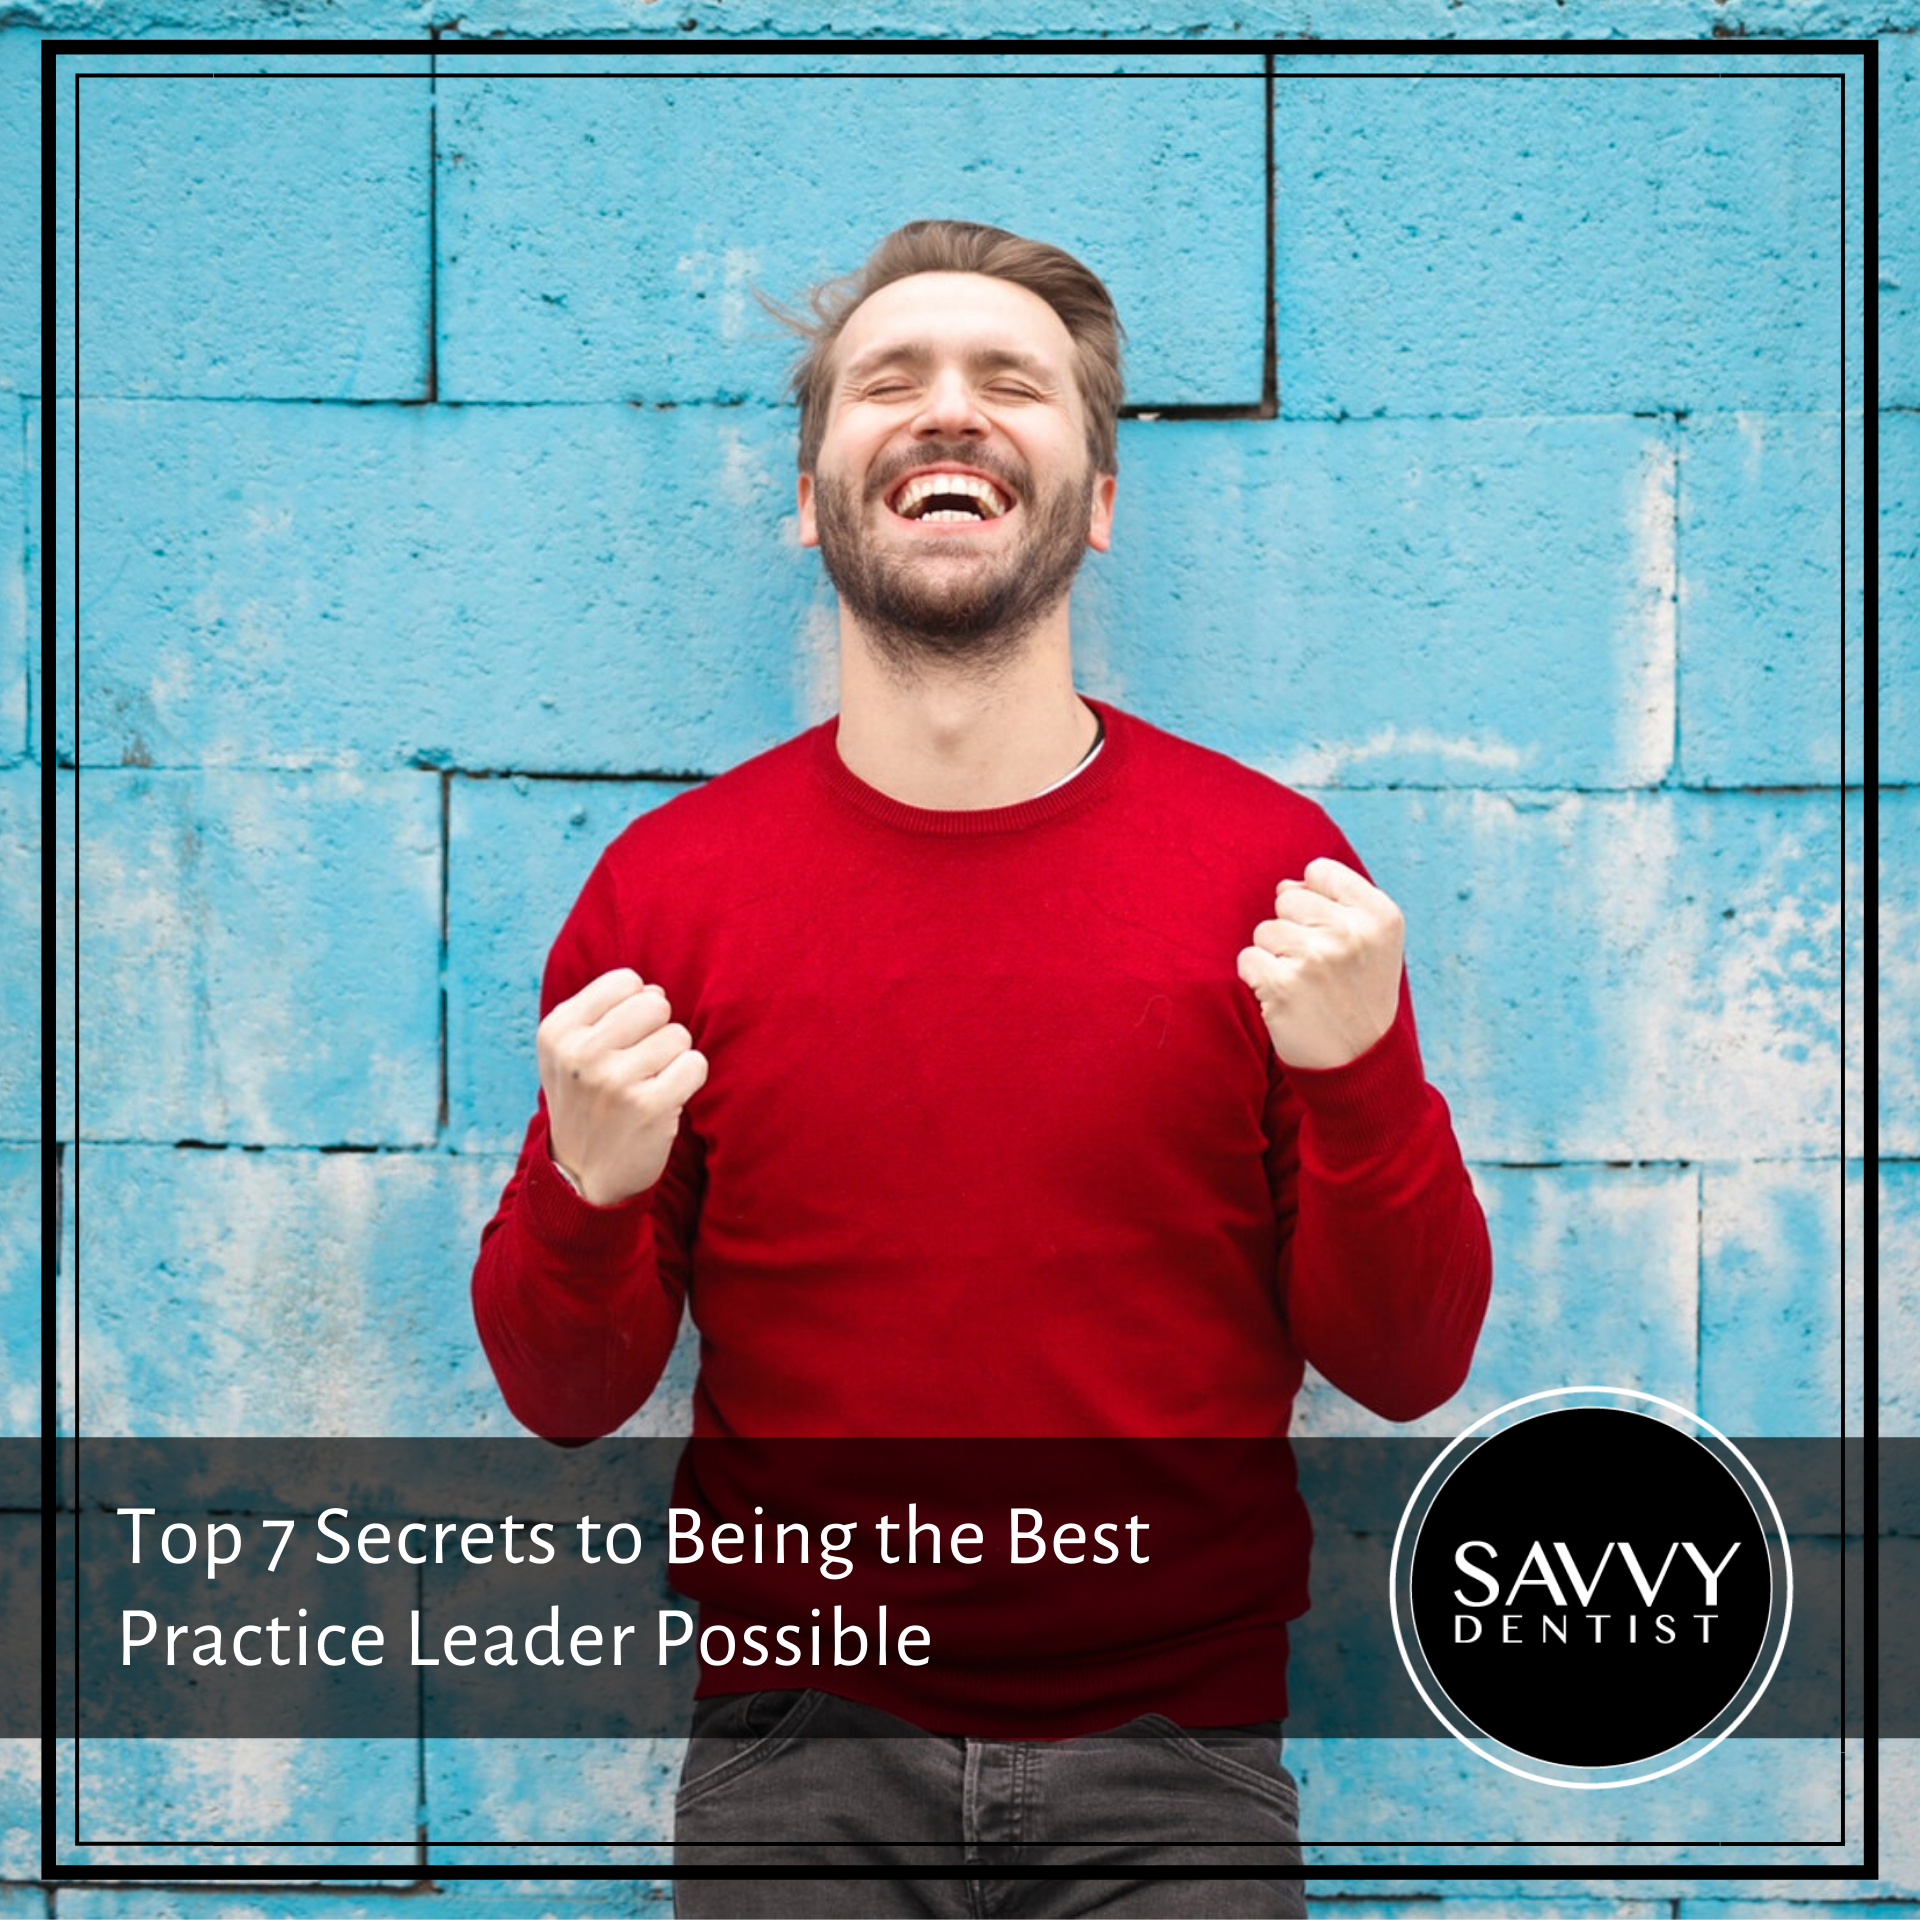 Top 7 Secrets to Being the Best Practice Leader Possible